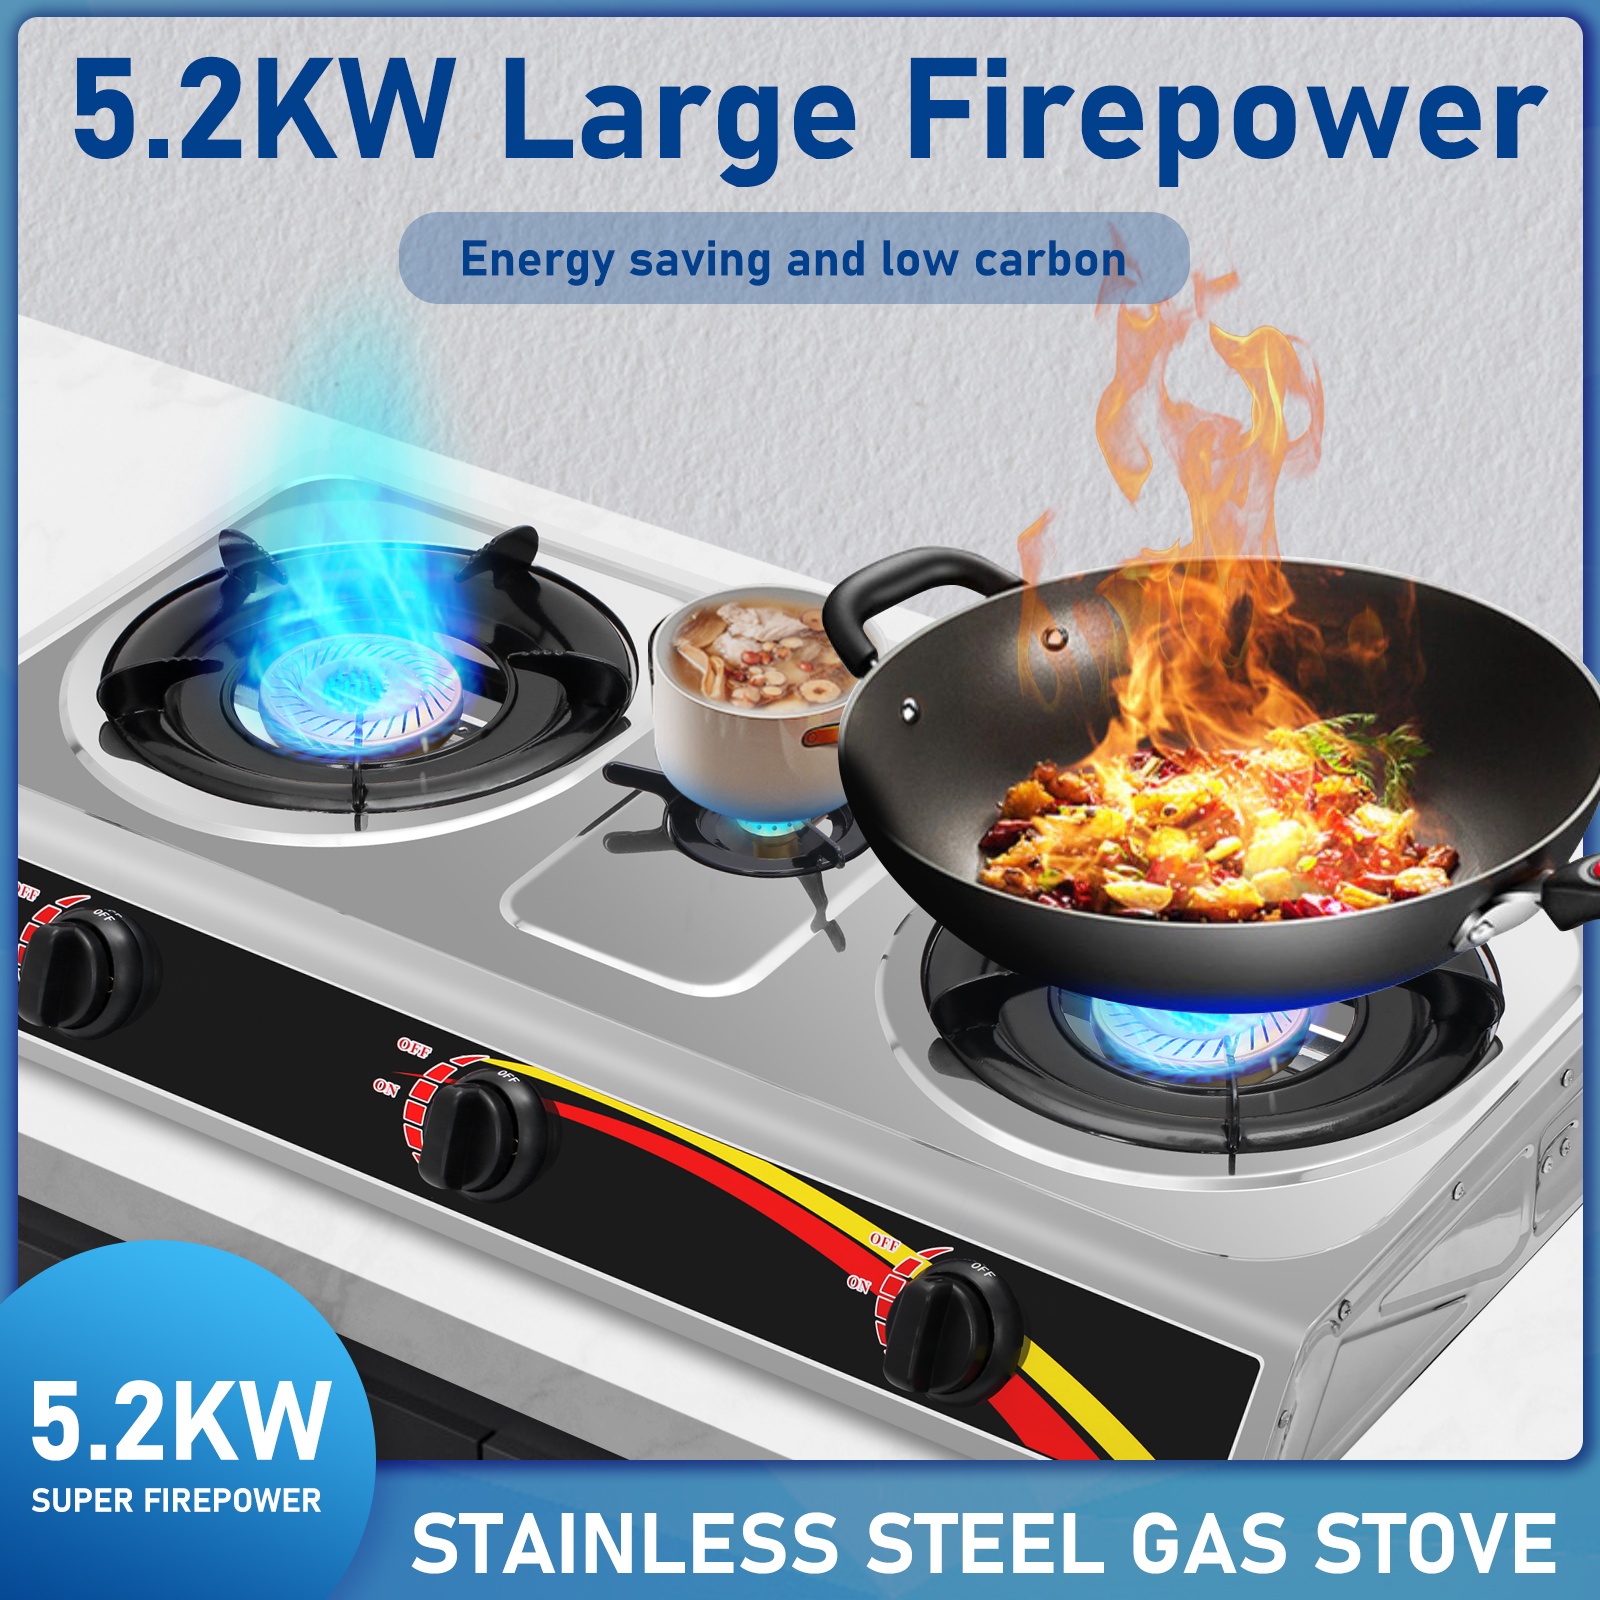 Jadeshay Propane Gas Cooktop 3 Burners Gas Stove Portable Gas Stove Thickened Stainless Steel Double Burners Stove Auto Ignition Camping Double Burner LPG for RV,Apartments,Outdoor - image 1 of 10